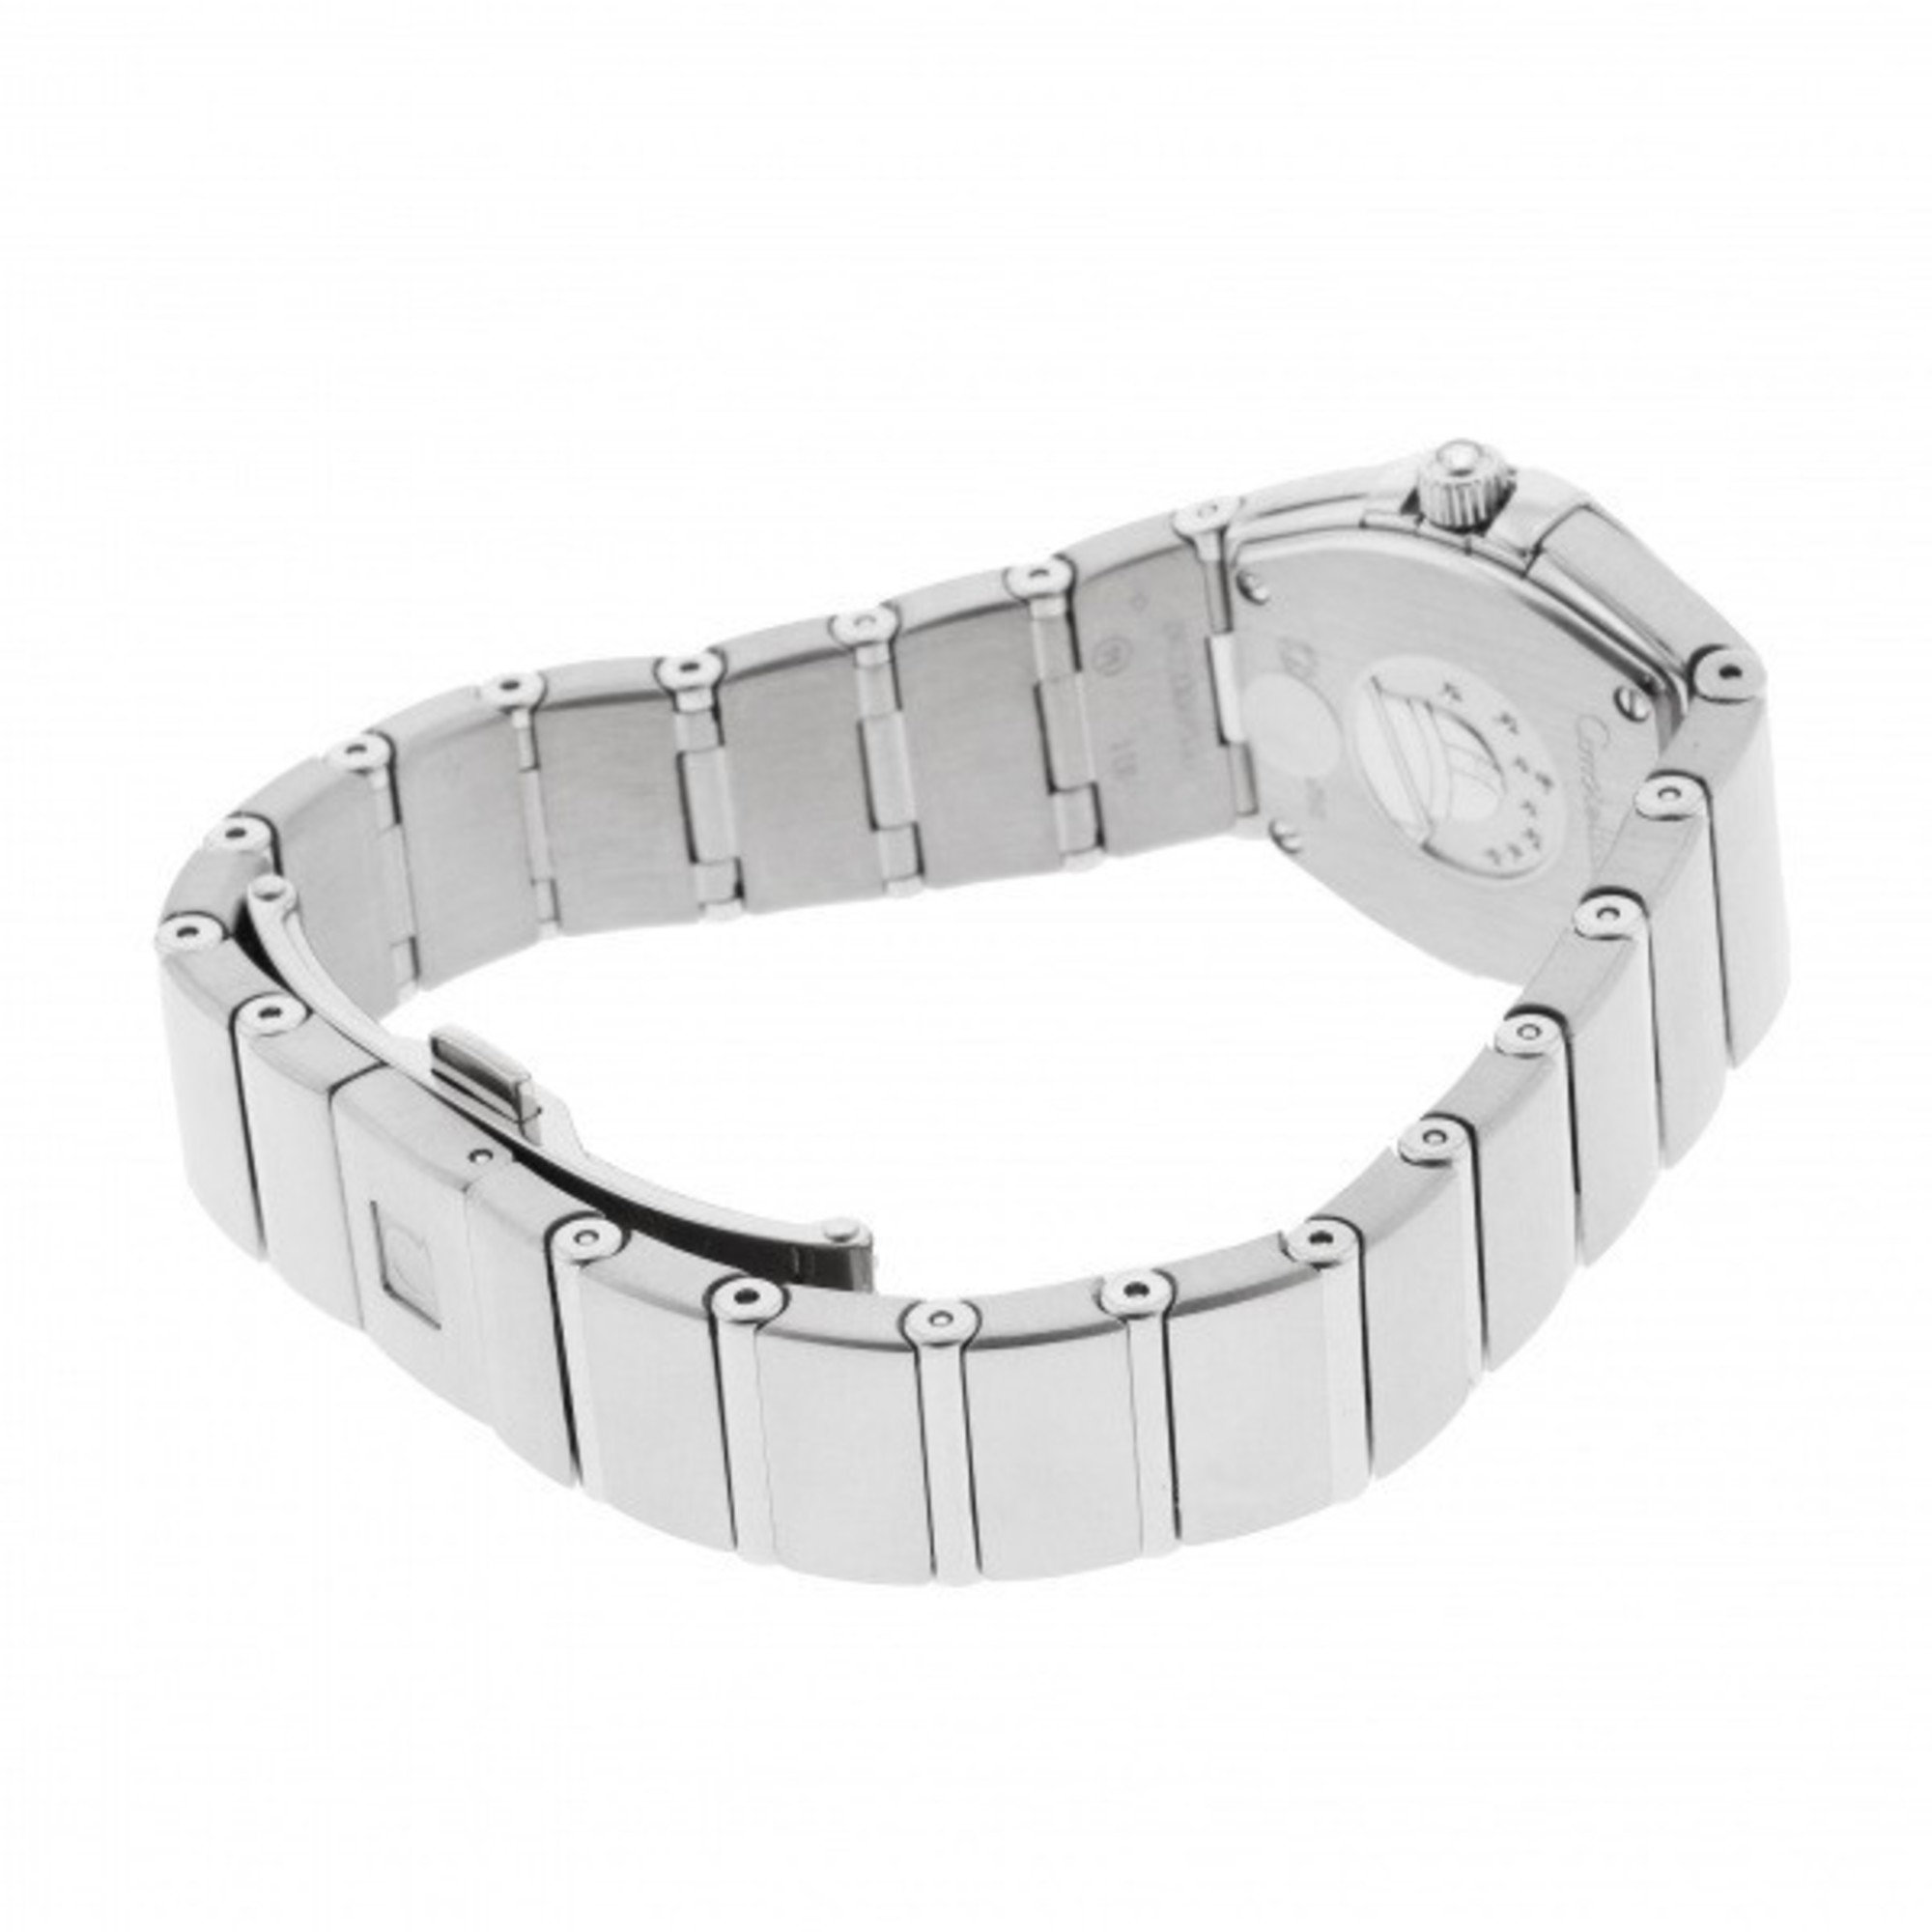 Omega OMEGA Constellation 123.55.24.60.55.017 White Dial Watch Women's